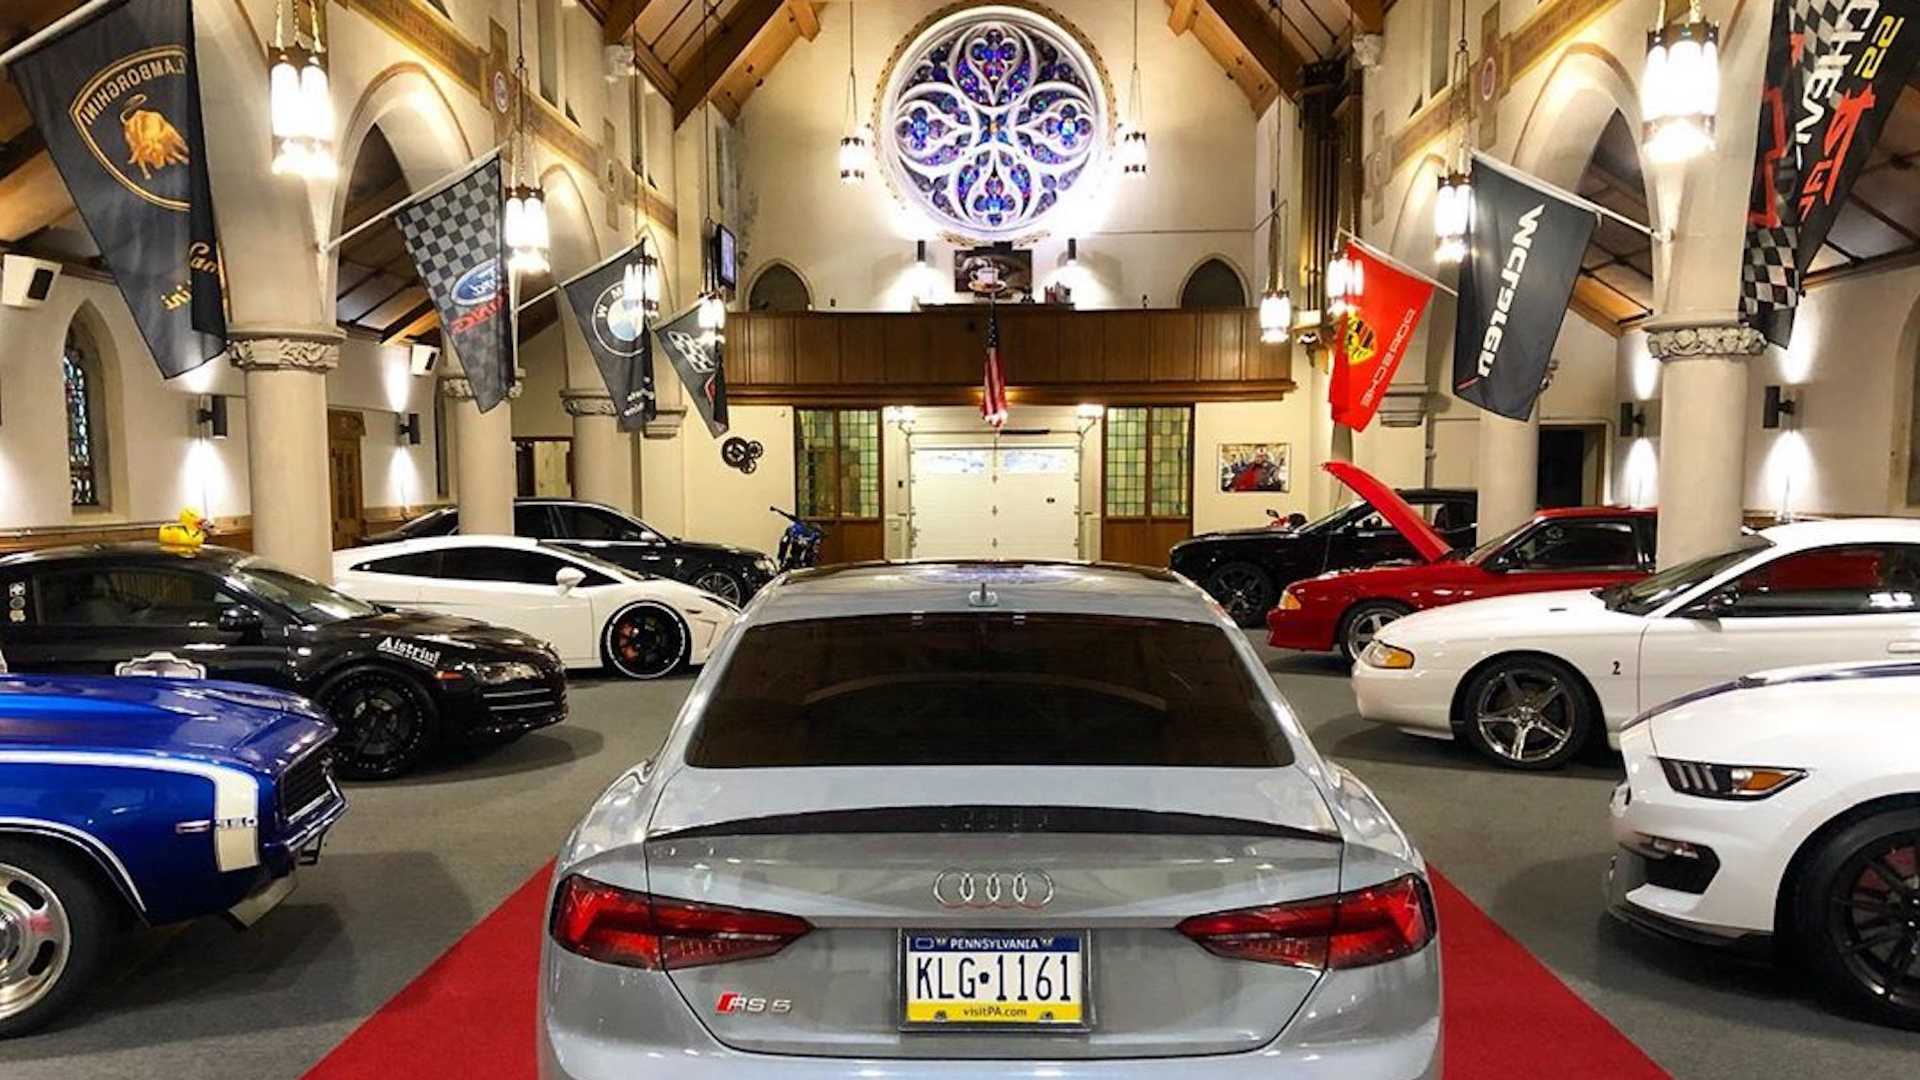 The Holy Grail Garage